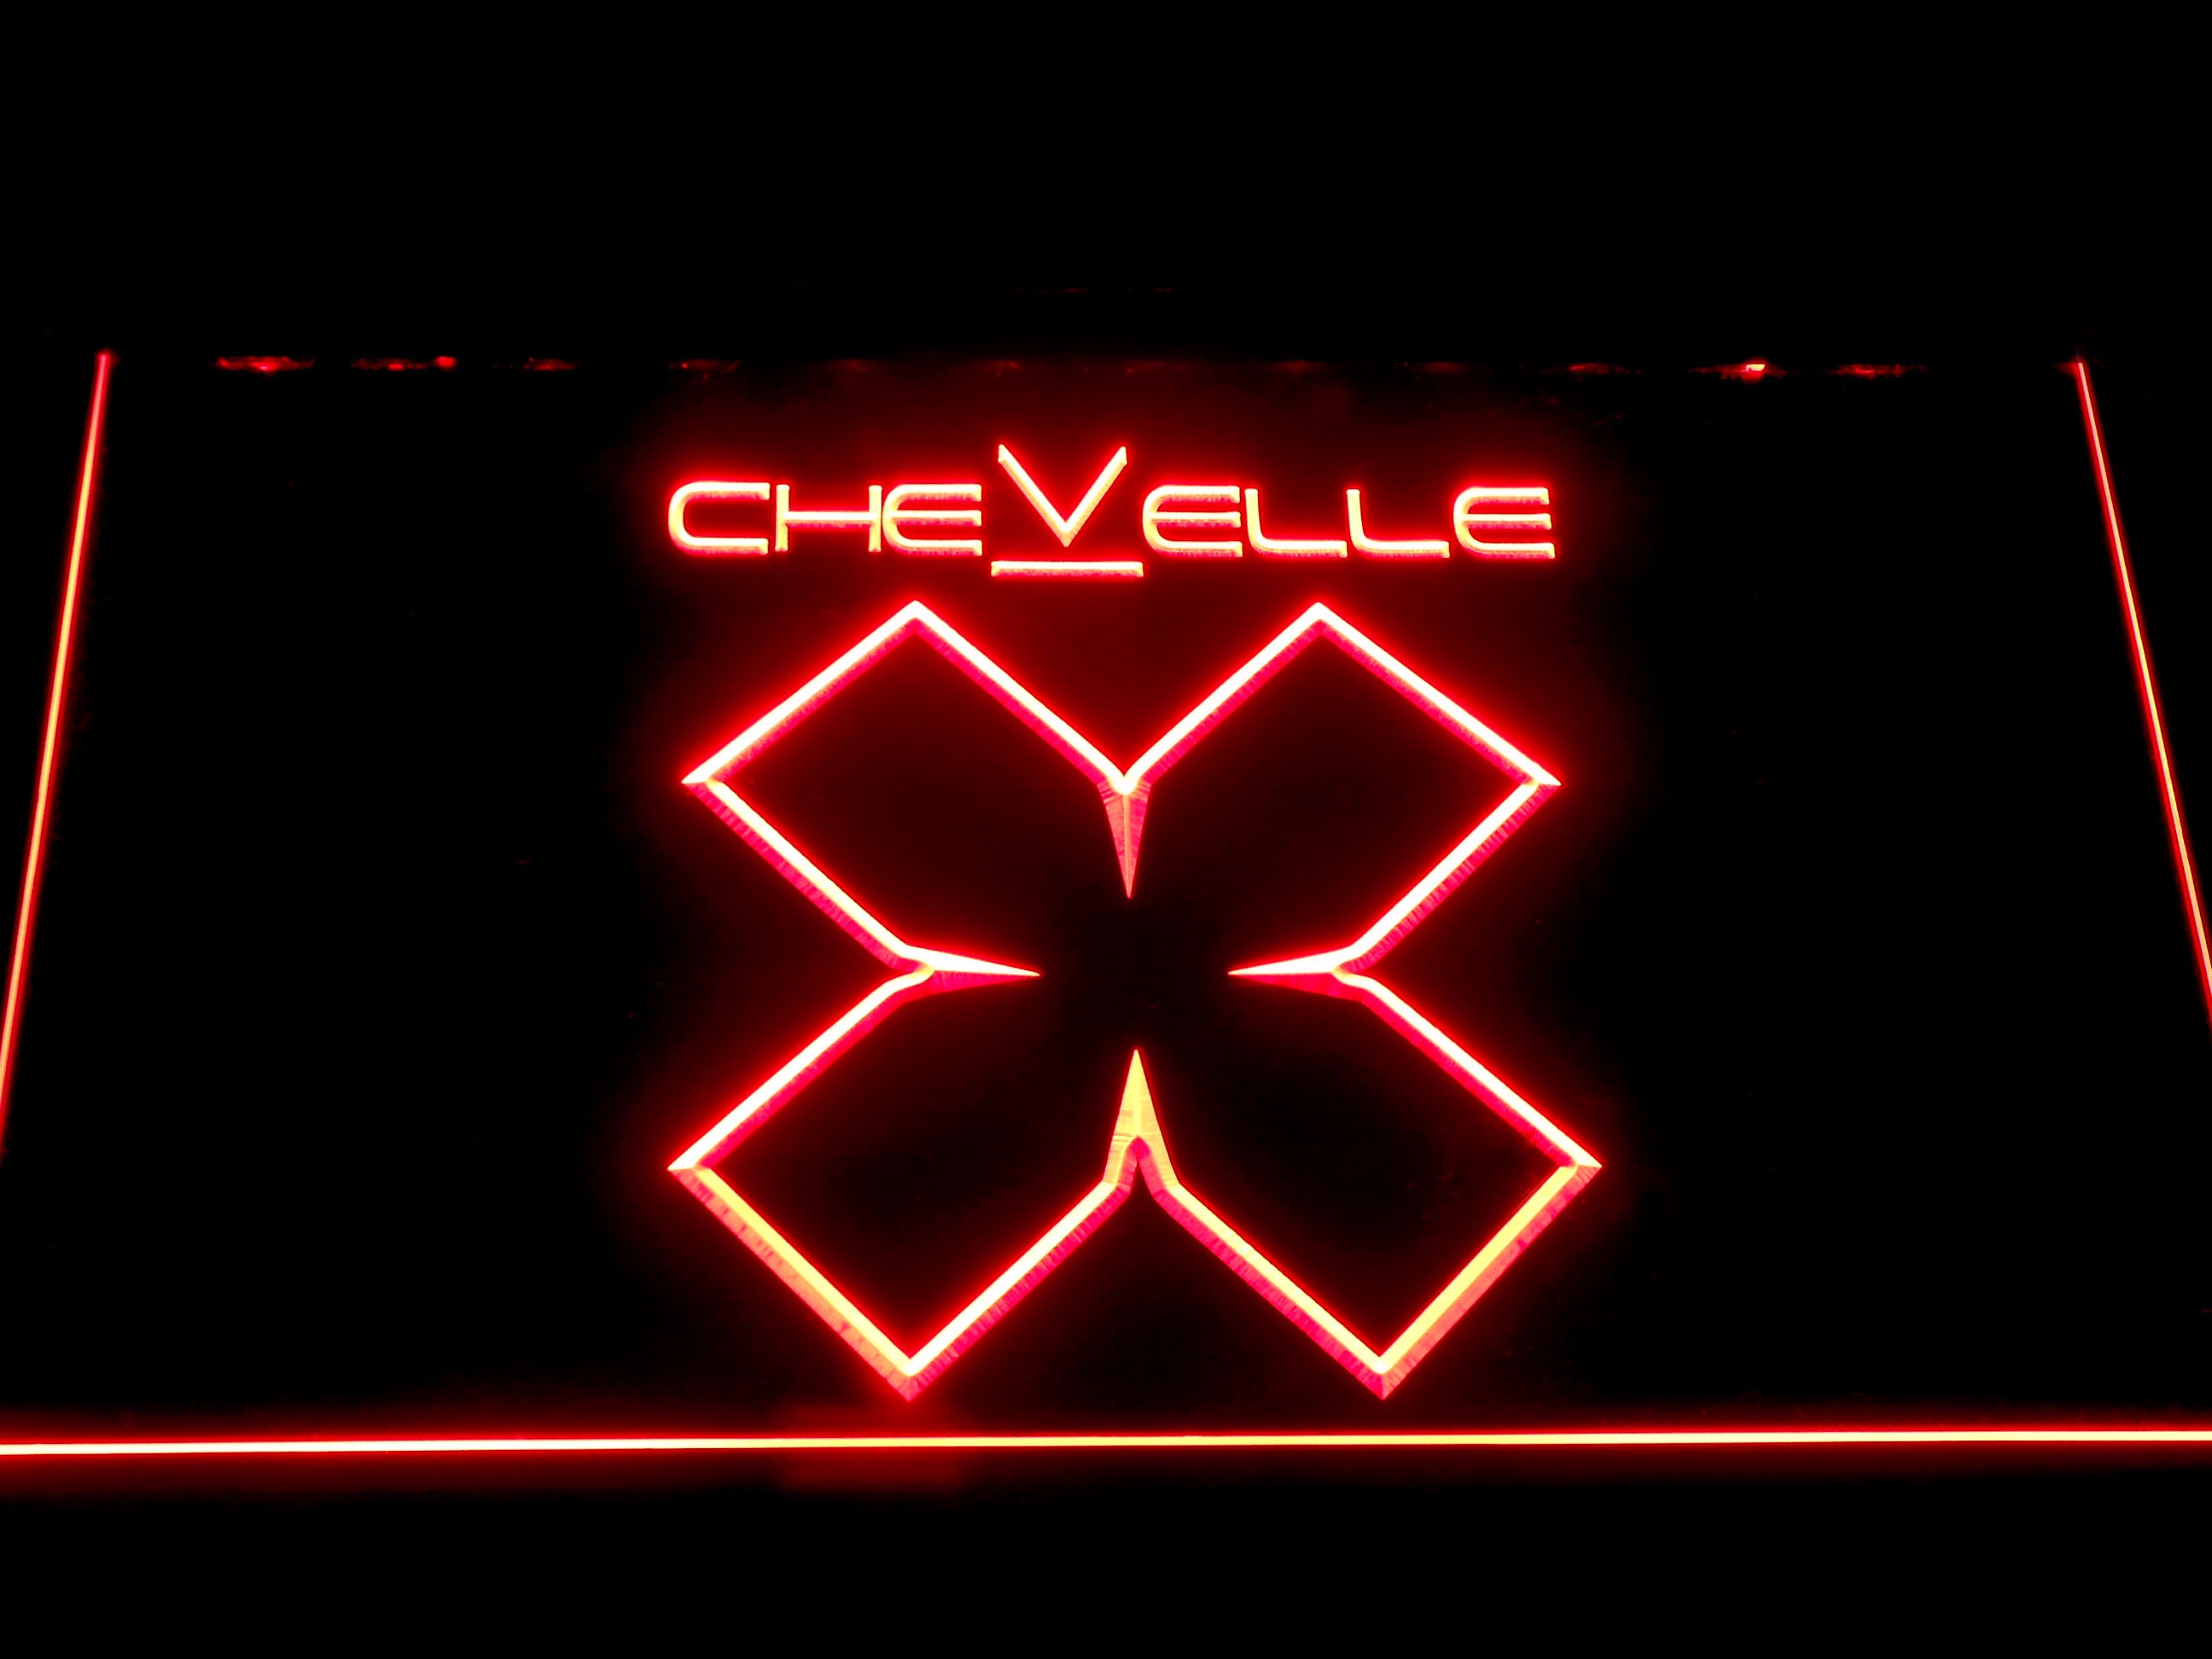 Chevelle Metal Band LED Neon Sign